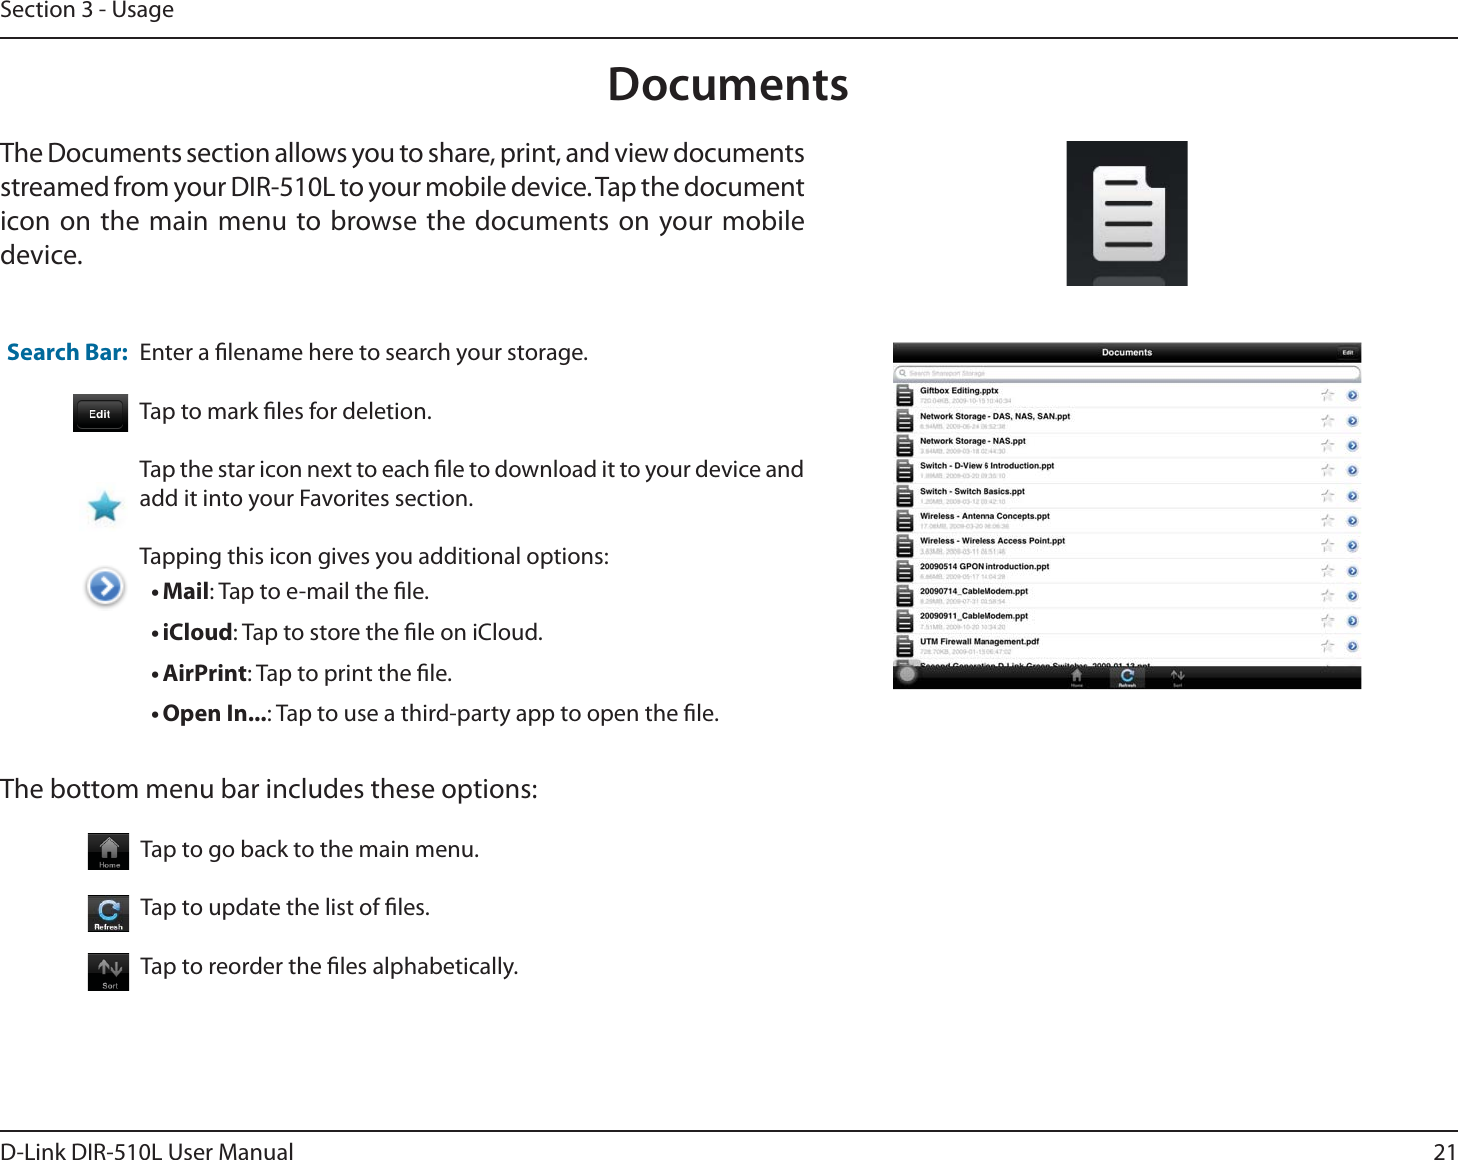 21D-Link DIR-510L User ManualSection 3 - UsageDocumentsThe Documents section allows you to share, print, and view documents streamed from your DIR-510L to your mobile device. Tap the document icon on the main menu to browse the documents on your mobile device.Enter a lename here to search your storage.Tap to mark les for deletion.Tap the star icon next to each le to download it to your device and add it into your Favorites section.Tapping this icon gives you additional options:tMail: Tap to e-mail the le.tiCloud: Tap to store the le on iCloud.tAirPrint: Tap to print the le.tOpen In...: Tap to use a third-party app to open the le.The bottom menu bar includes these options:Search Bar: Tap to go back to the main menu.Tap to update the list of les.Tap to reorder the les alphabetically.